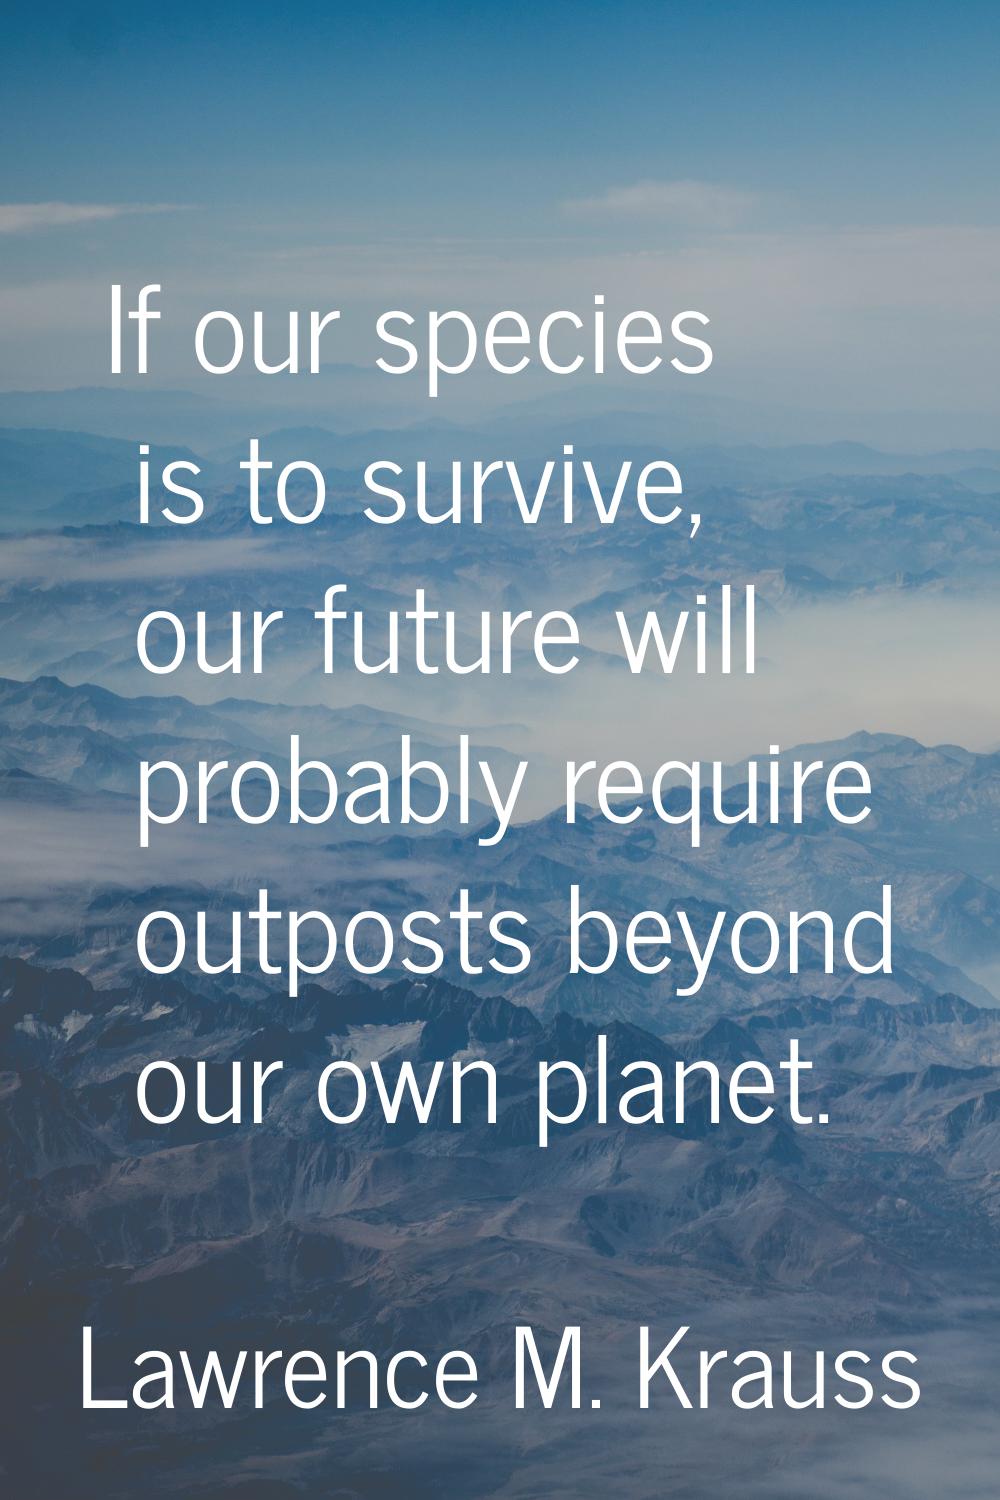 If our species is to survive, our future will probably require outposts beyond our own planet.